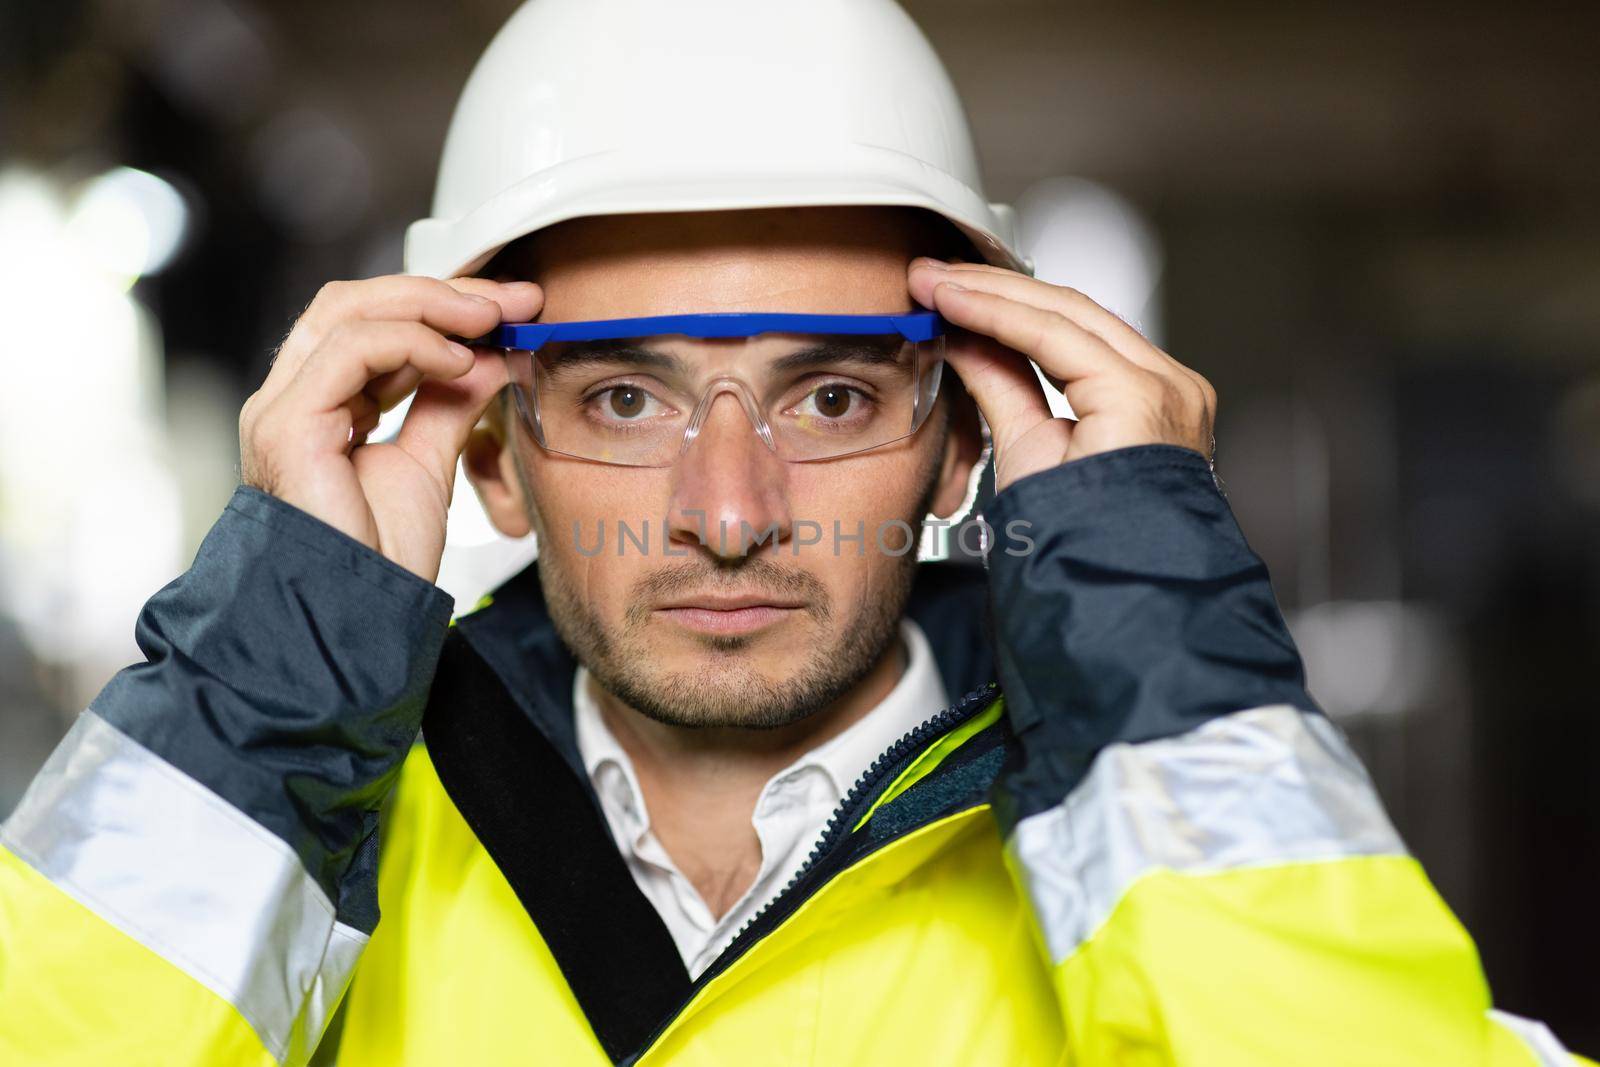 Closeup of Professional Confident Serious Engineer Looking at Camera, Wearing Safety Uniform and Goggles Standing at Heavy Industry Factory Ready to Manufacturing Works During Metal Welding by Staff.